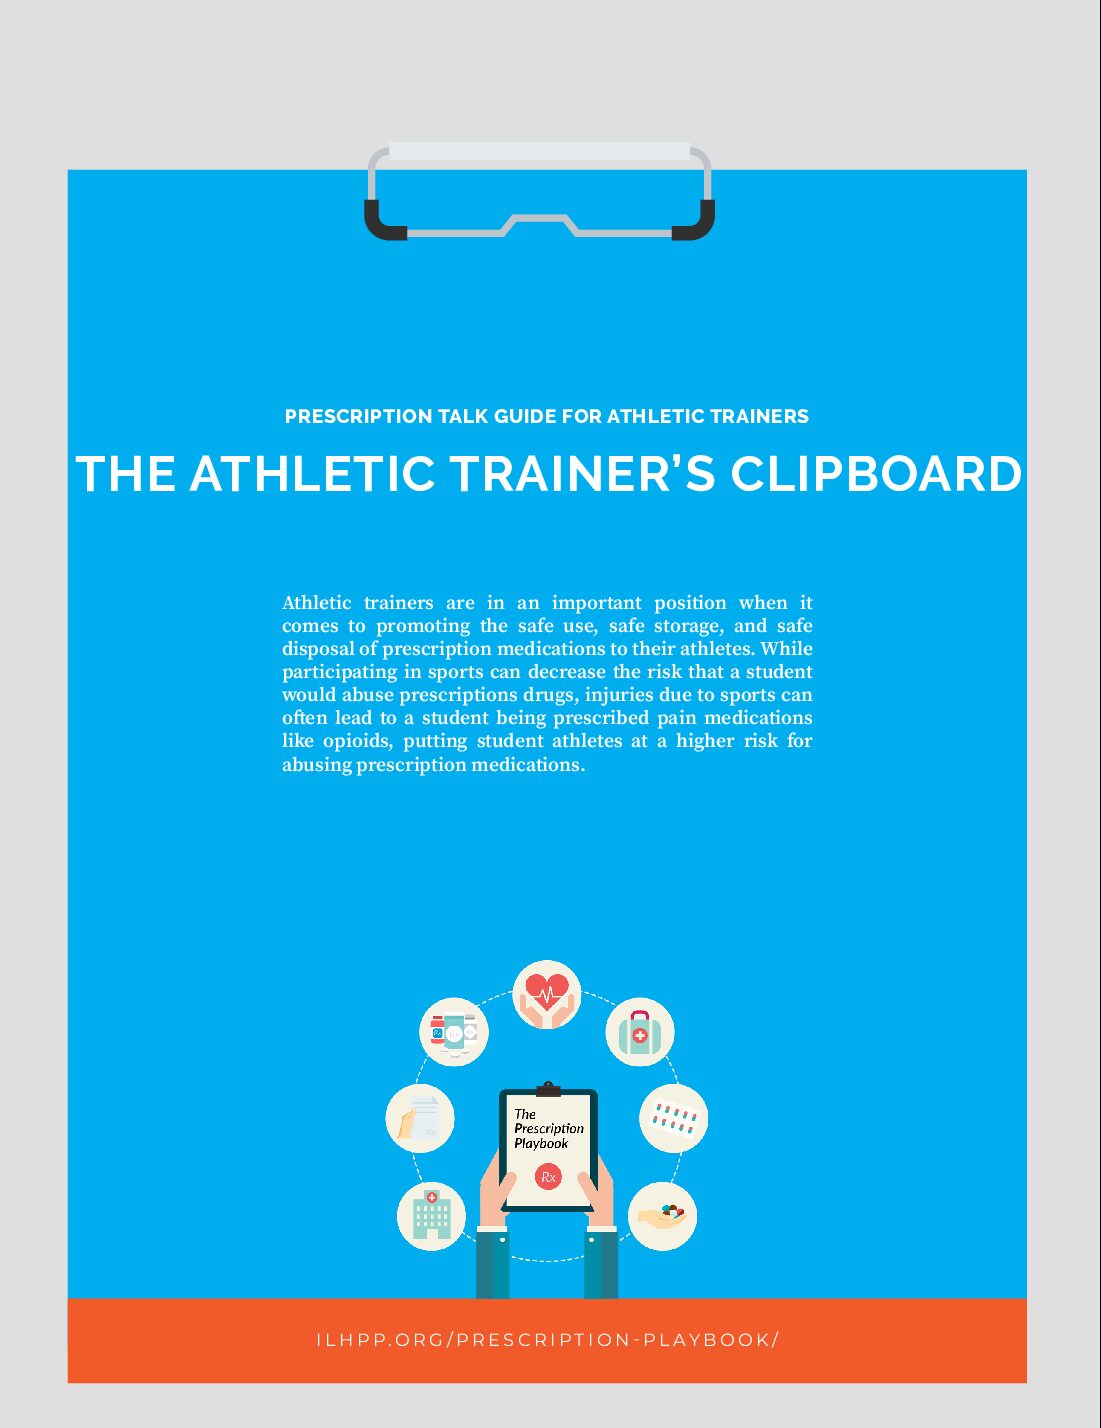 Enhancing Sports Safety: The Vital Role of Athletic Trainers